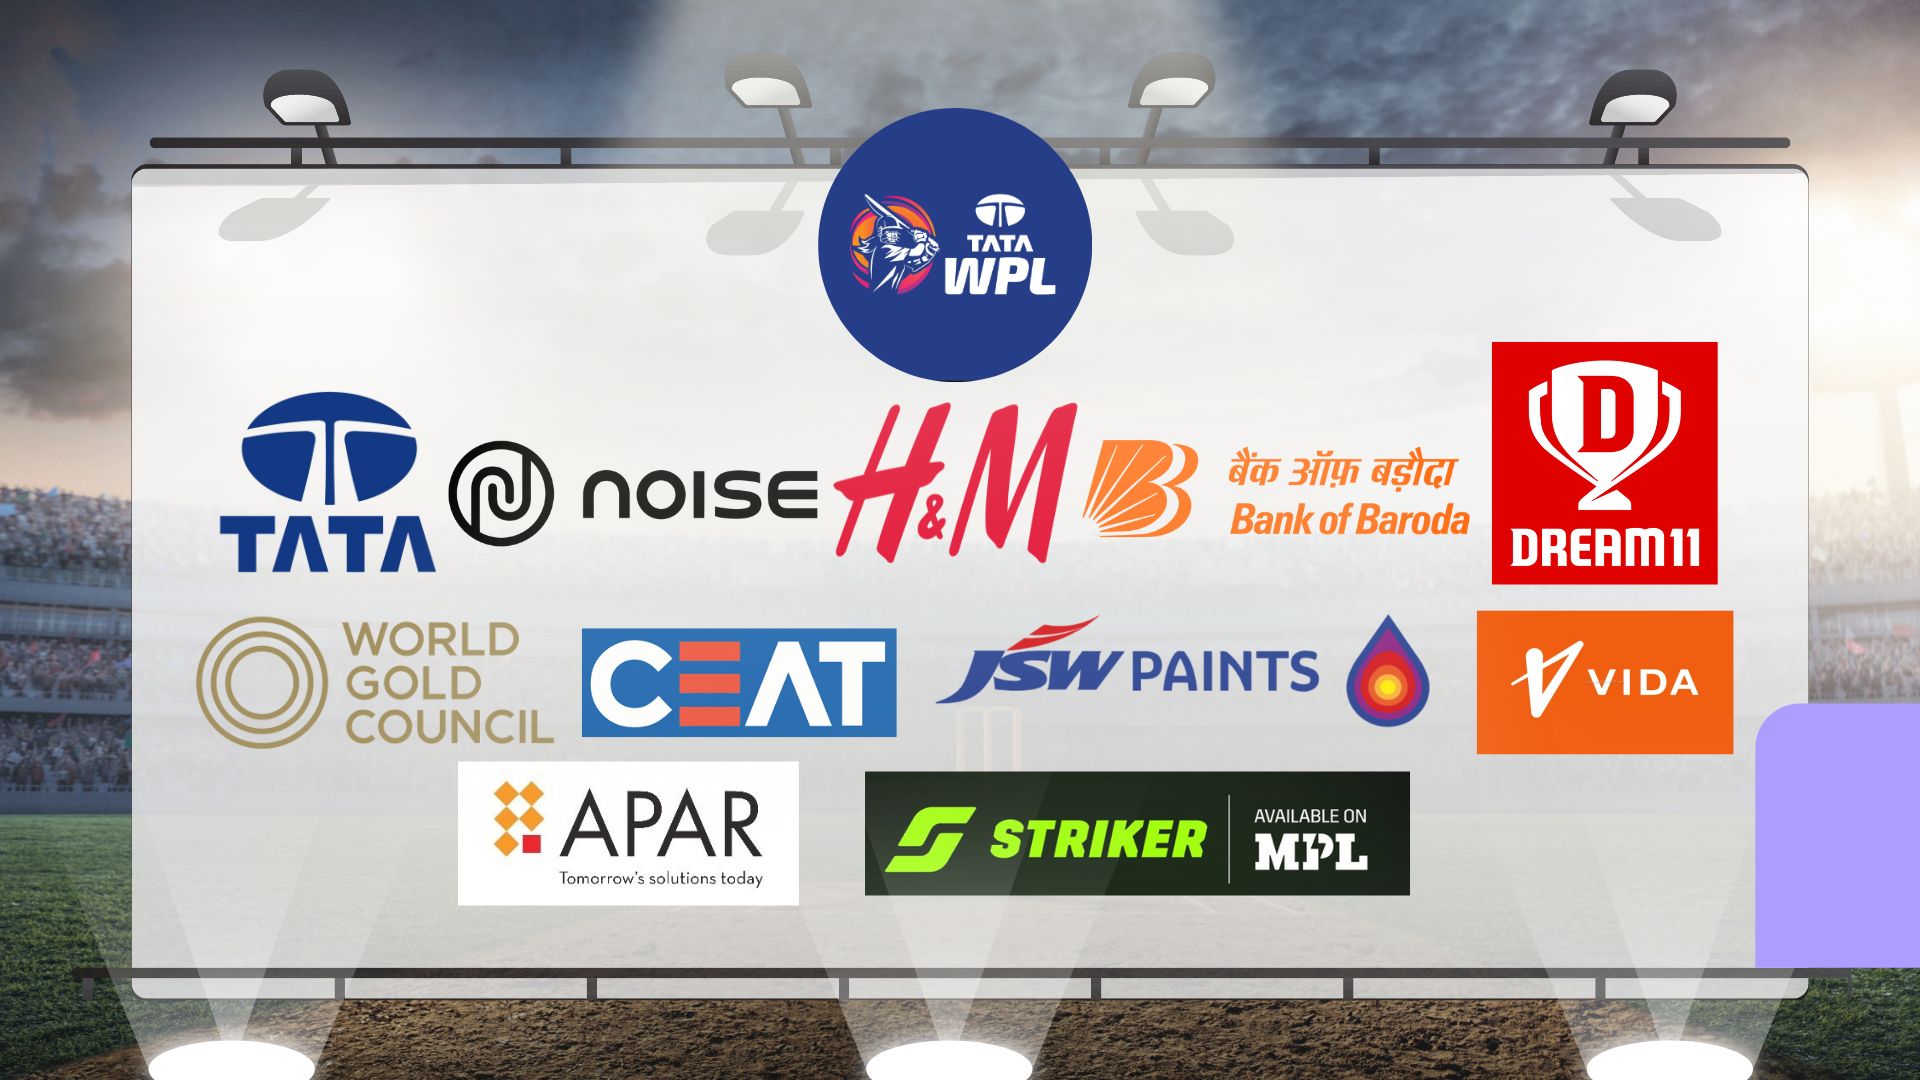 Women's IPL Sponsors Trends, Viewership and Brands Profile